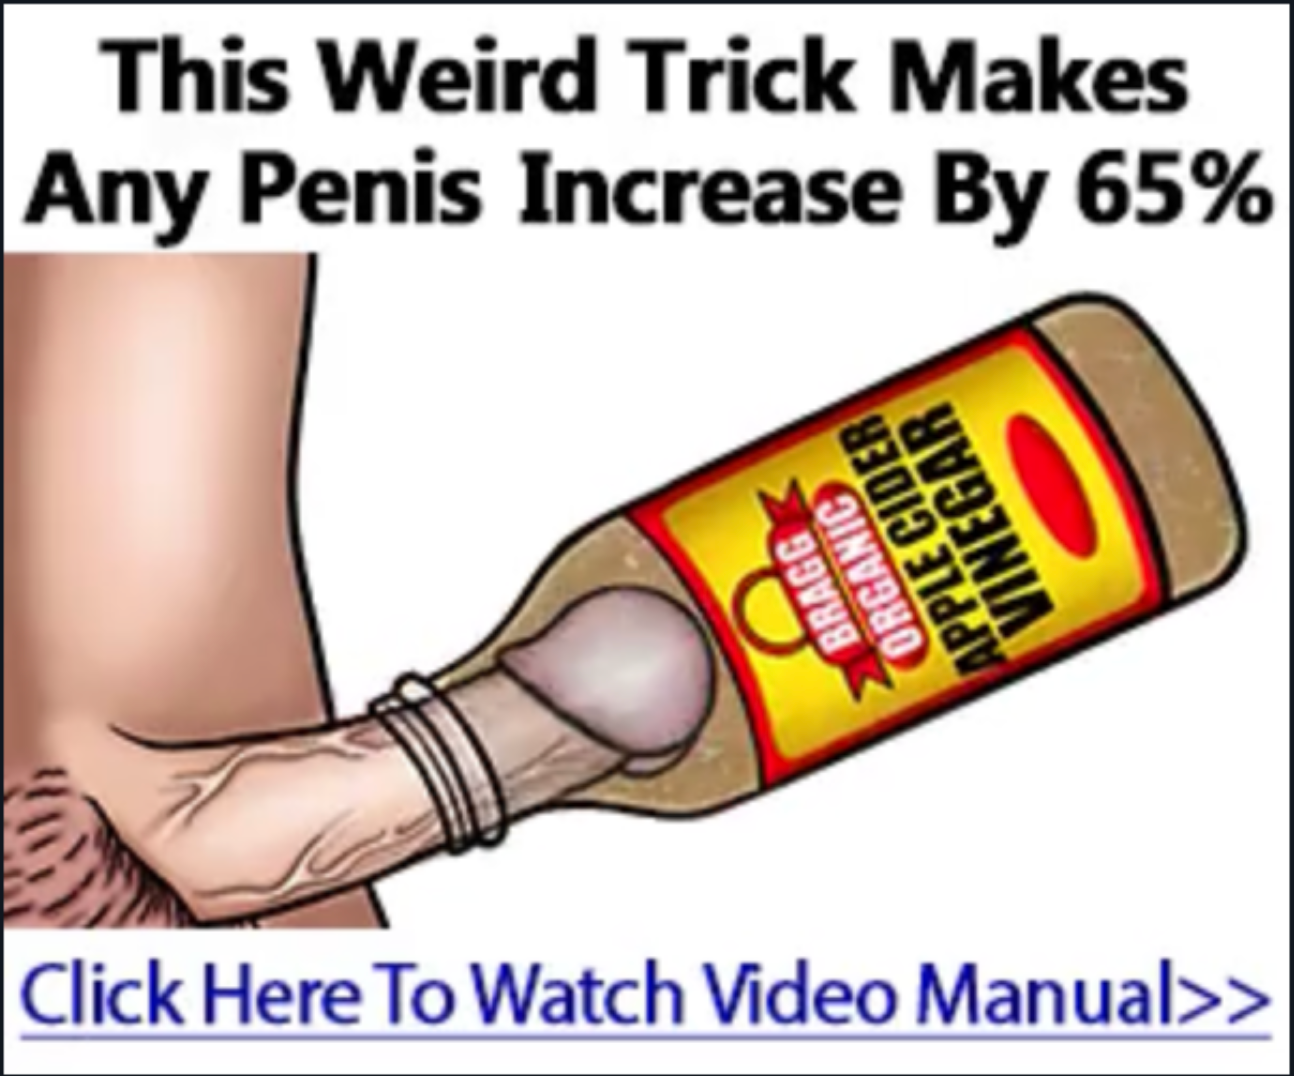 What makes your dick bigger naturally